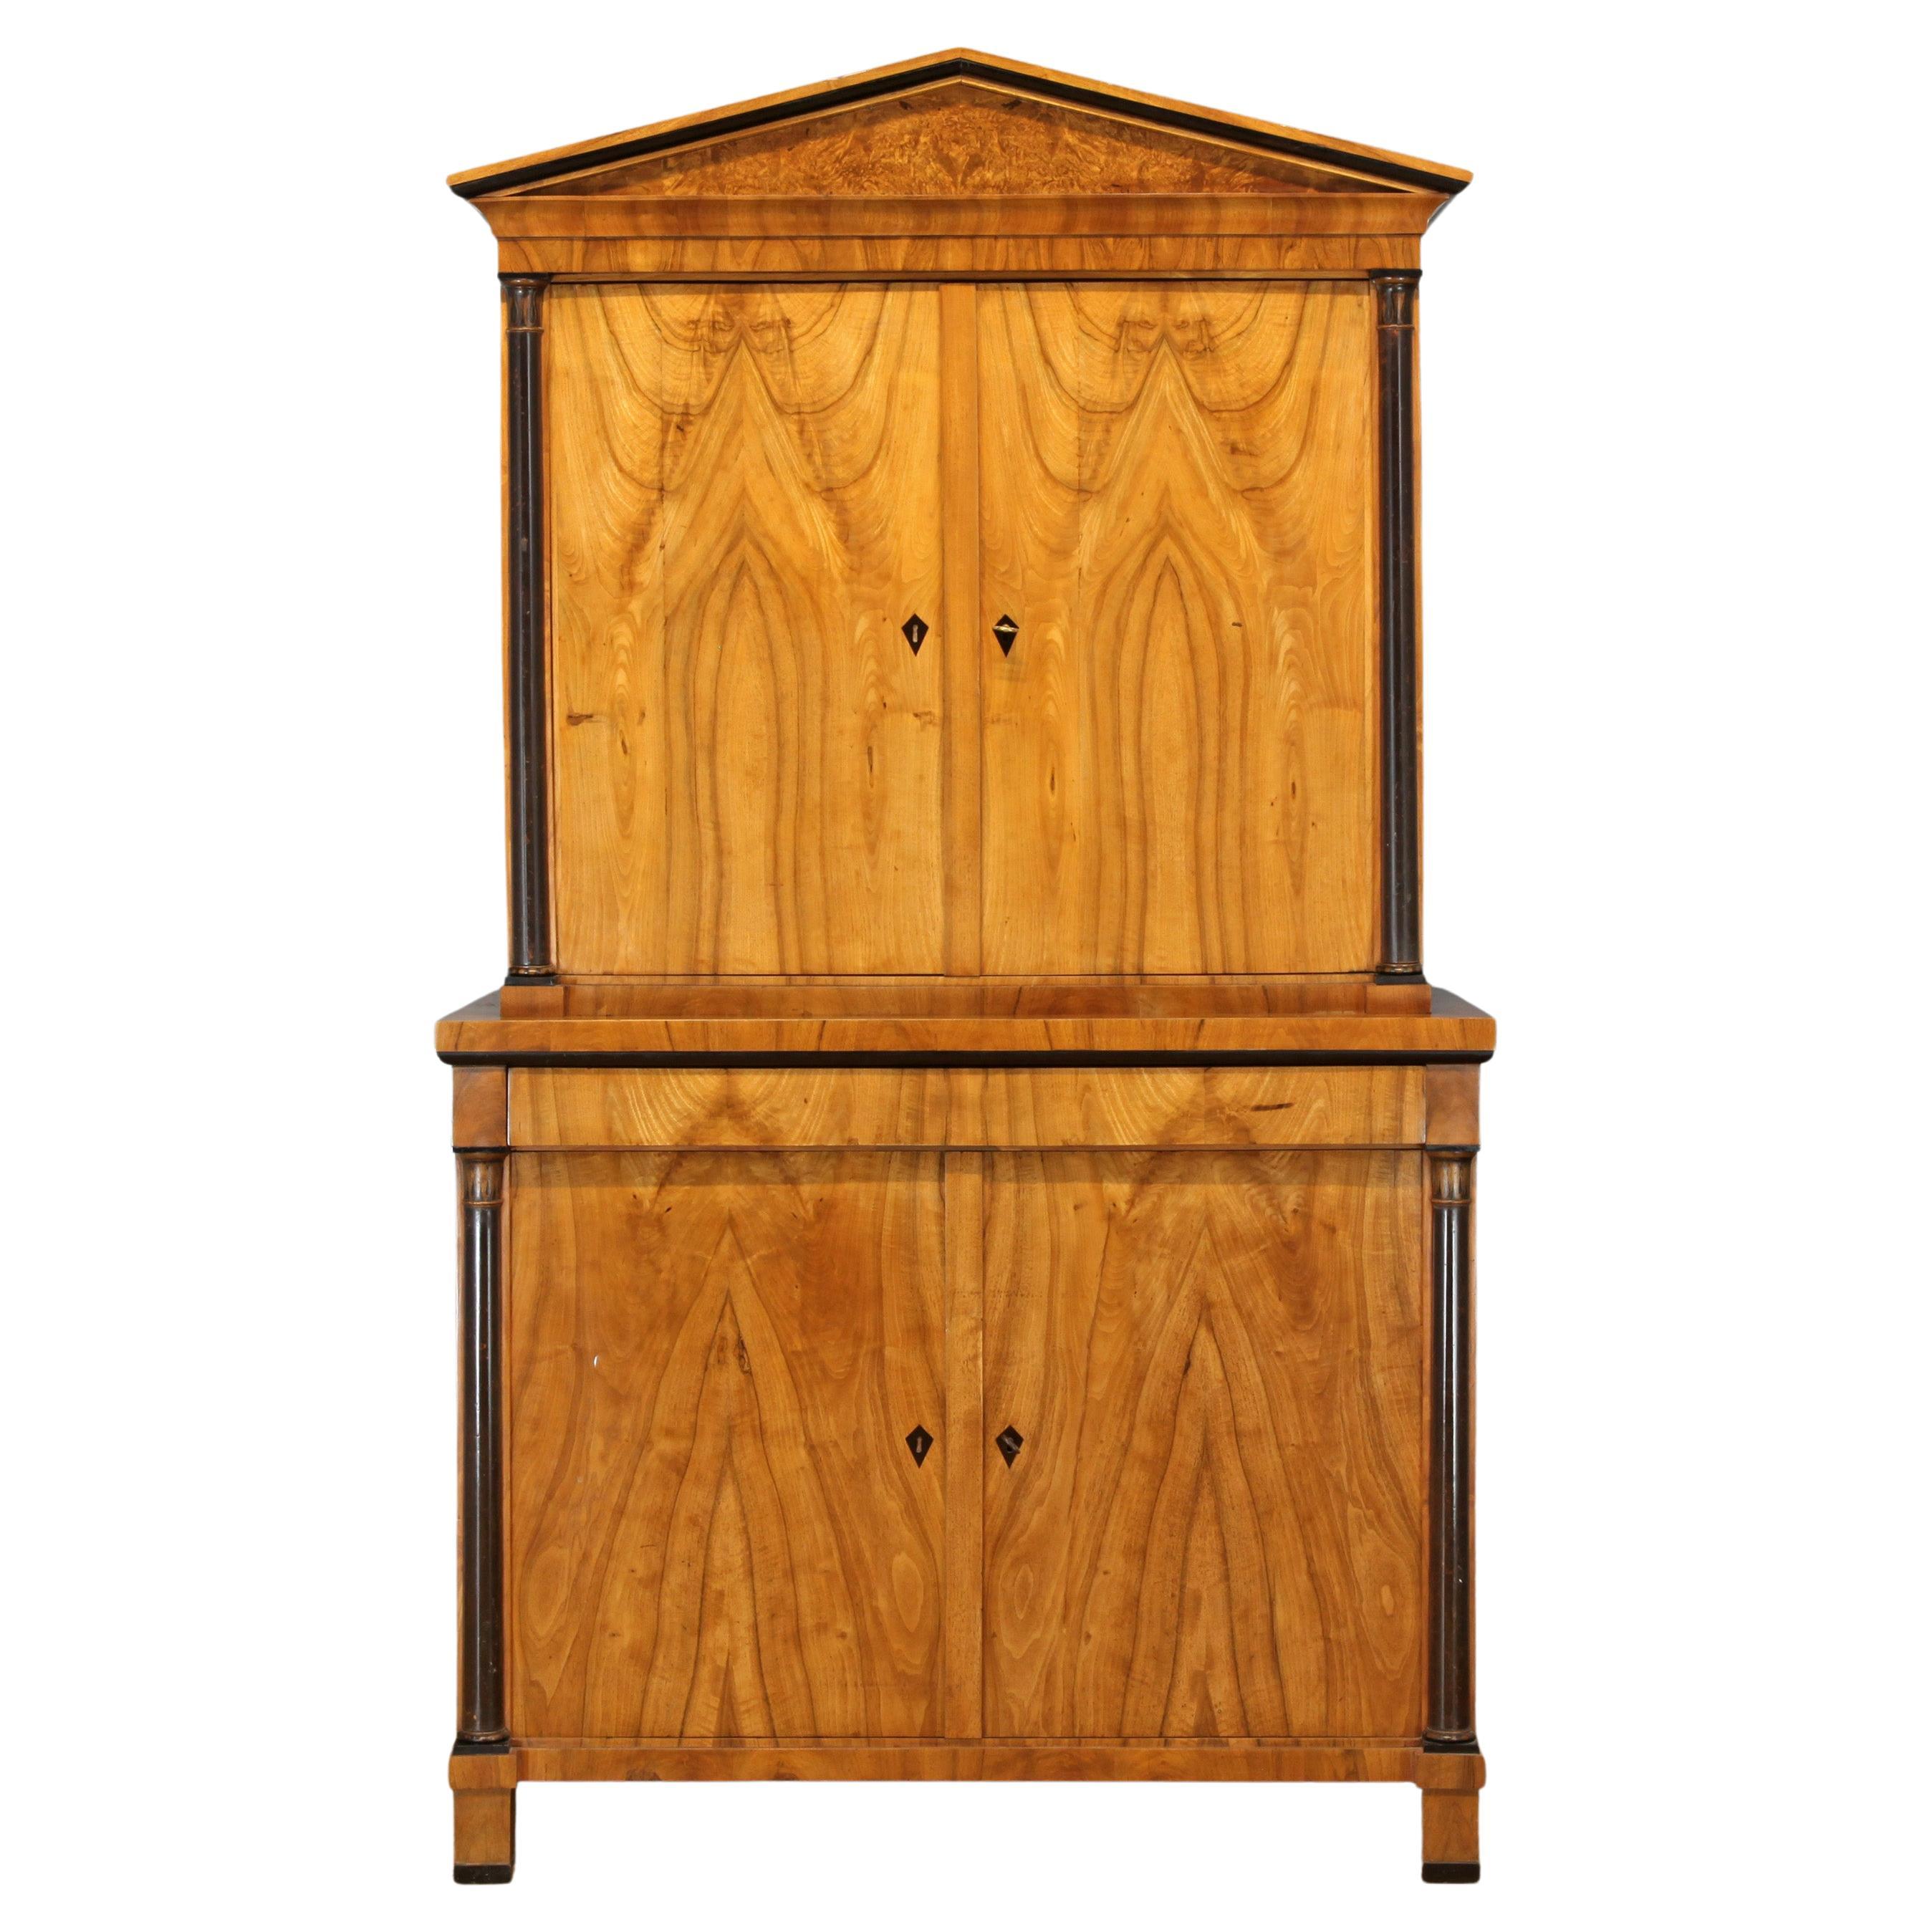 German Biedermeier Chest of Drawers with Top and Columns from 1820